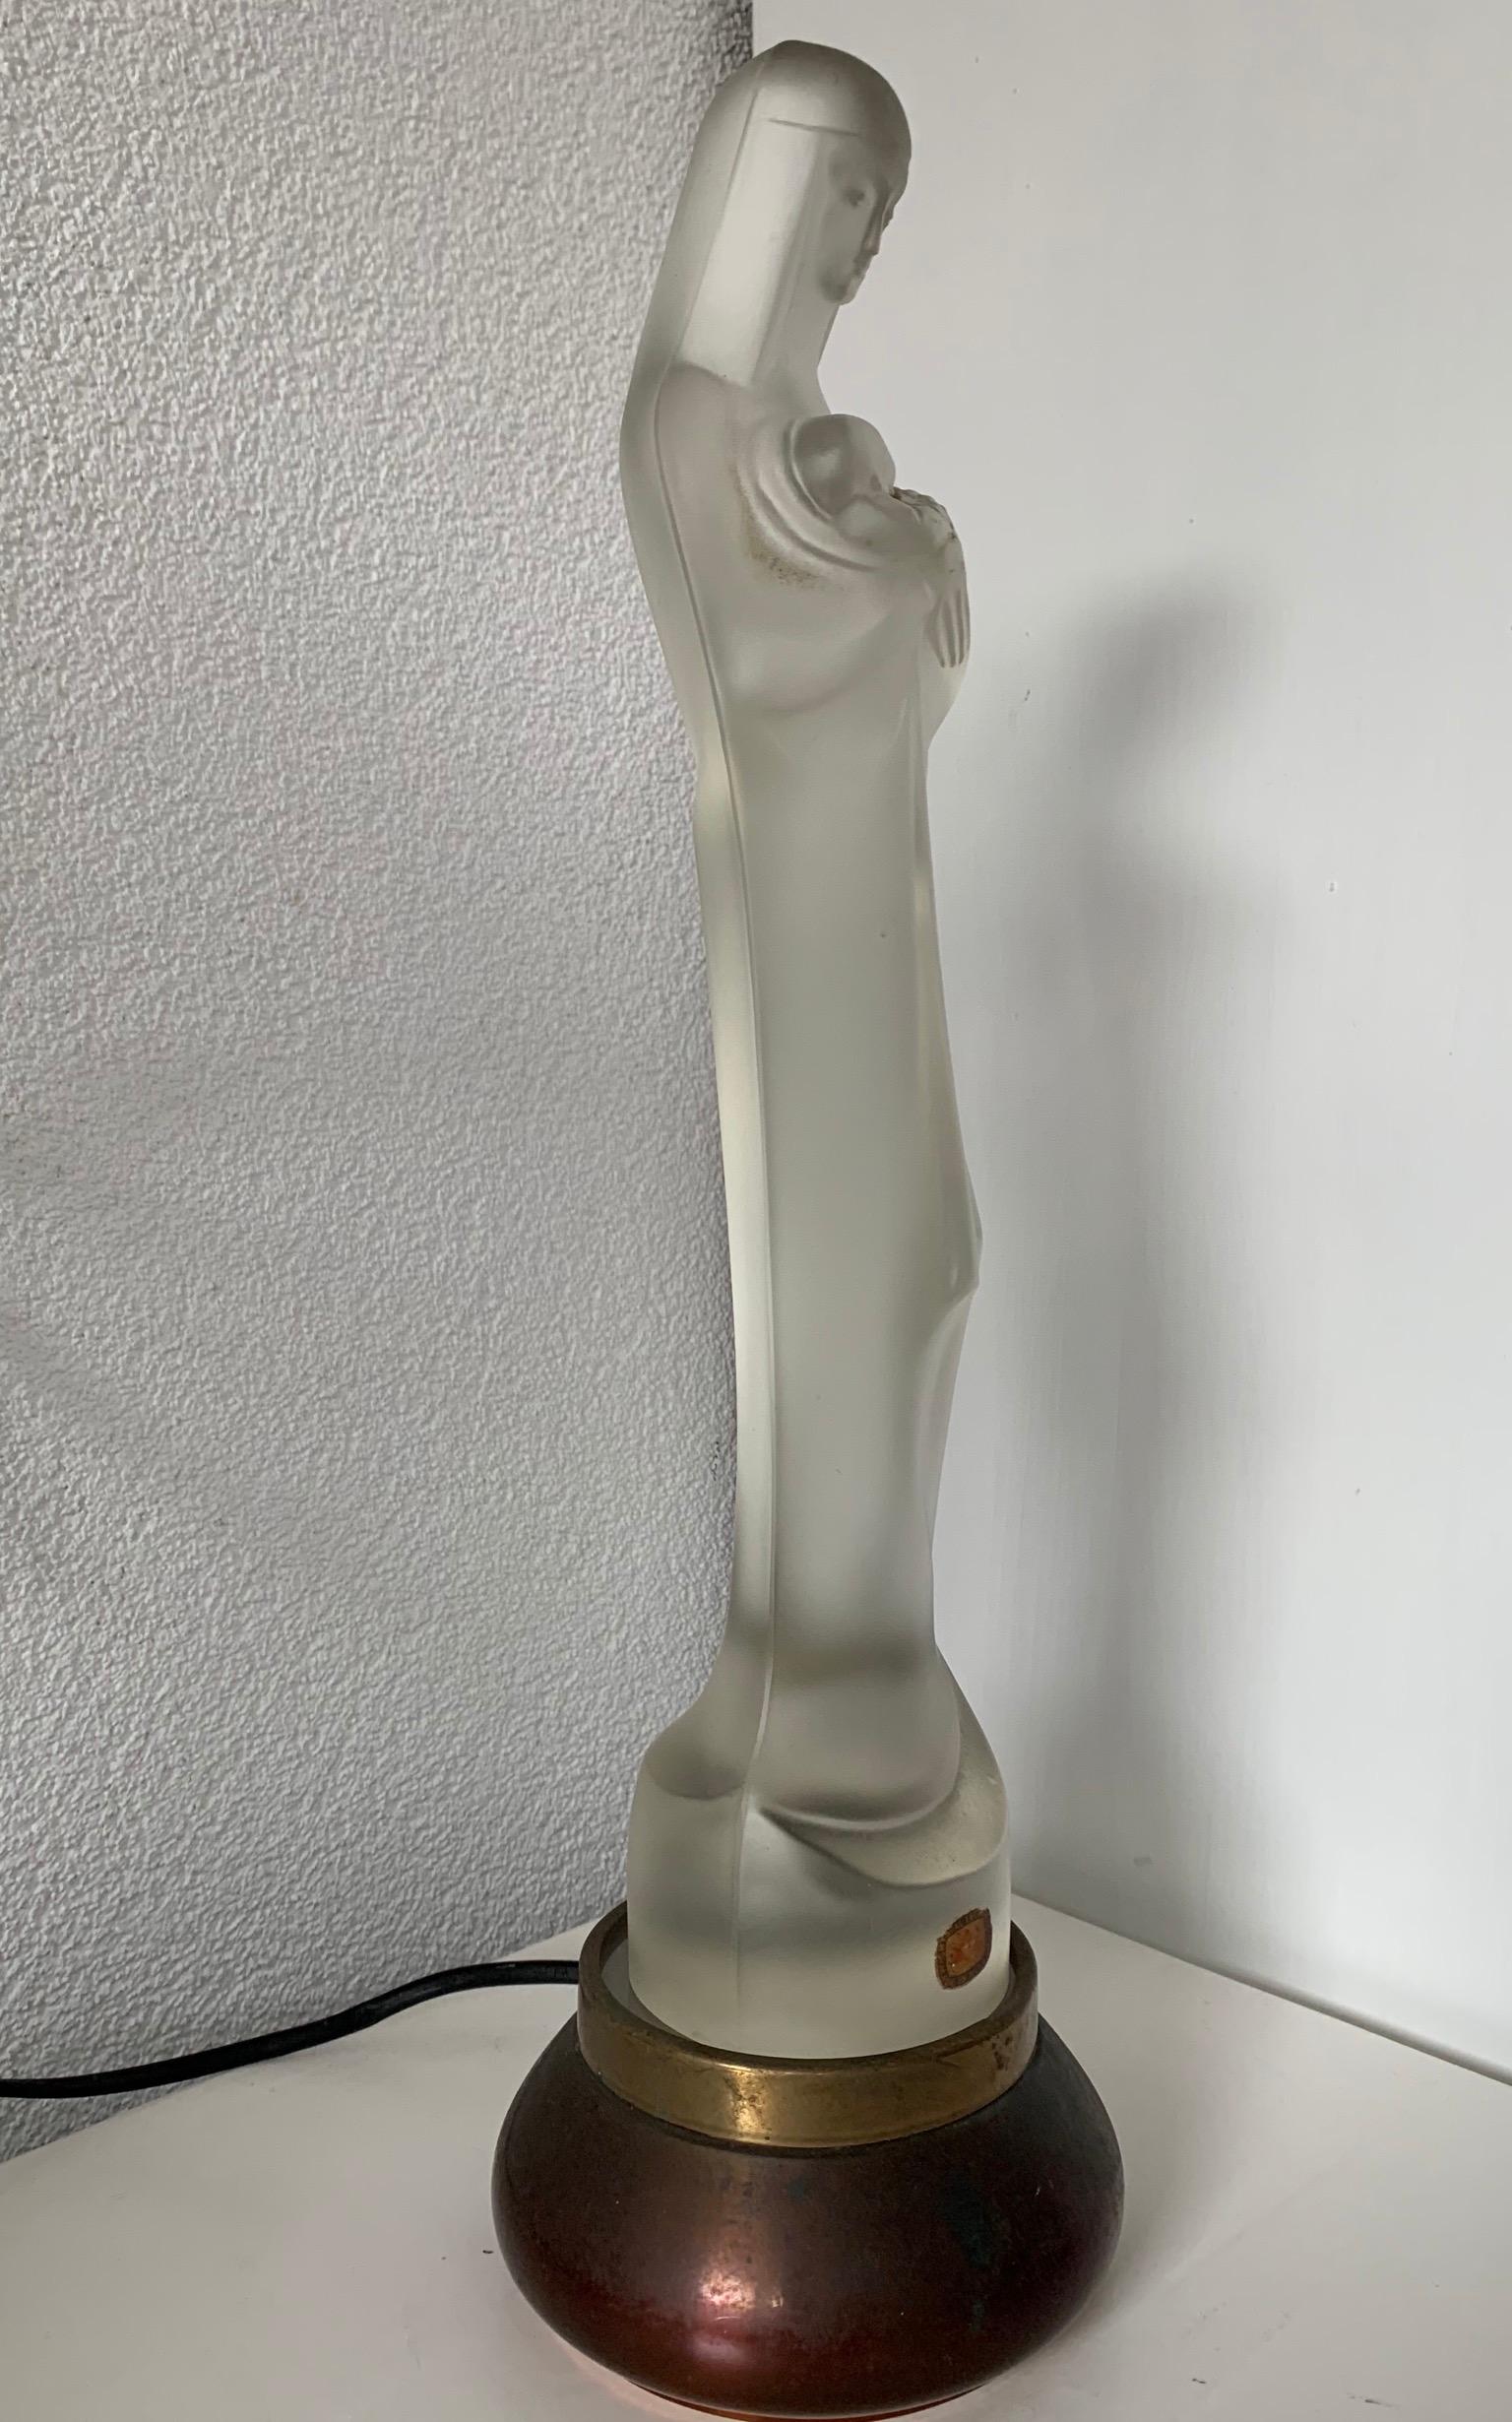 Stunning Design Glass Art Madonna and Child Jesus Sculpture w. Stand and Light For Sale 3